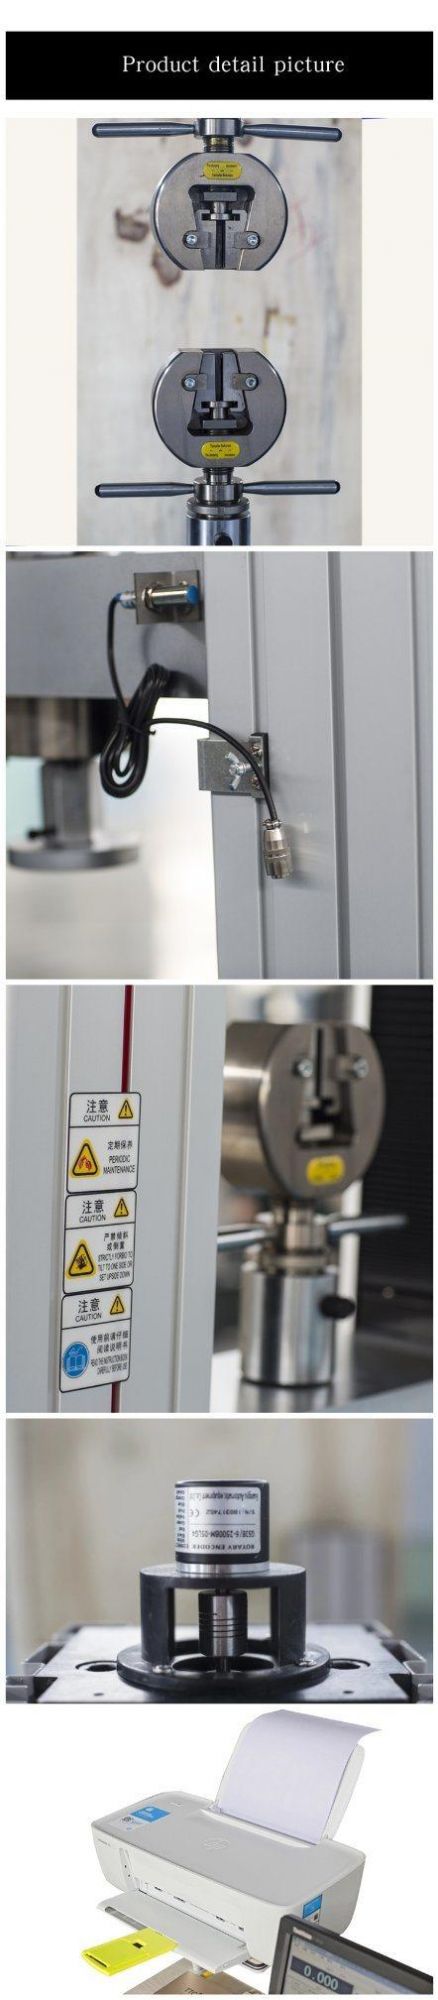 Wdw-100d Computer Controlled Tensile Strength Test Electronic Universal Testing Machine for Laboratory